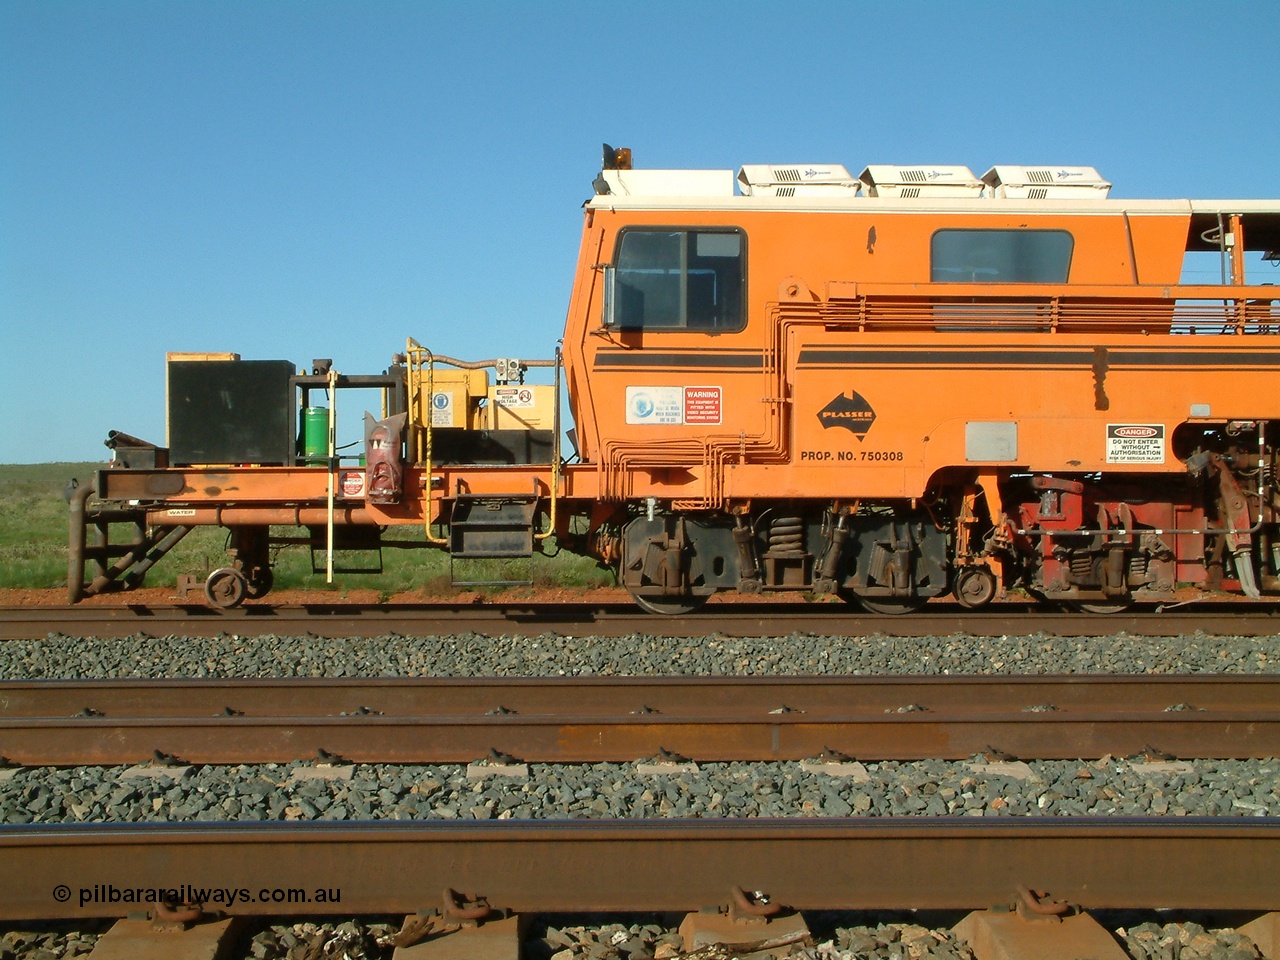 040408 162741
Mooka Siding north backtrack, side view of the driving cab end of BHP's mainline Tamper 1, Plasser Australia 09-32 CAT model with serial 306. 8th April 2004.
Keywords: Tamper1;Plasser-Australia;09-32-CAT;306;track-machine;